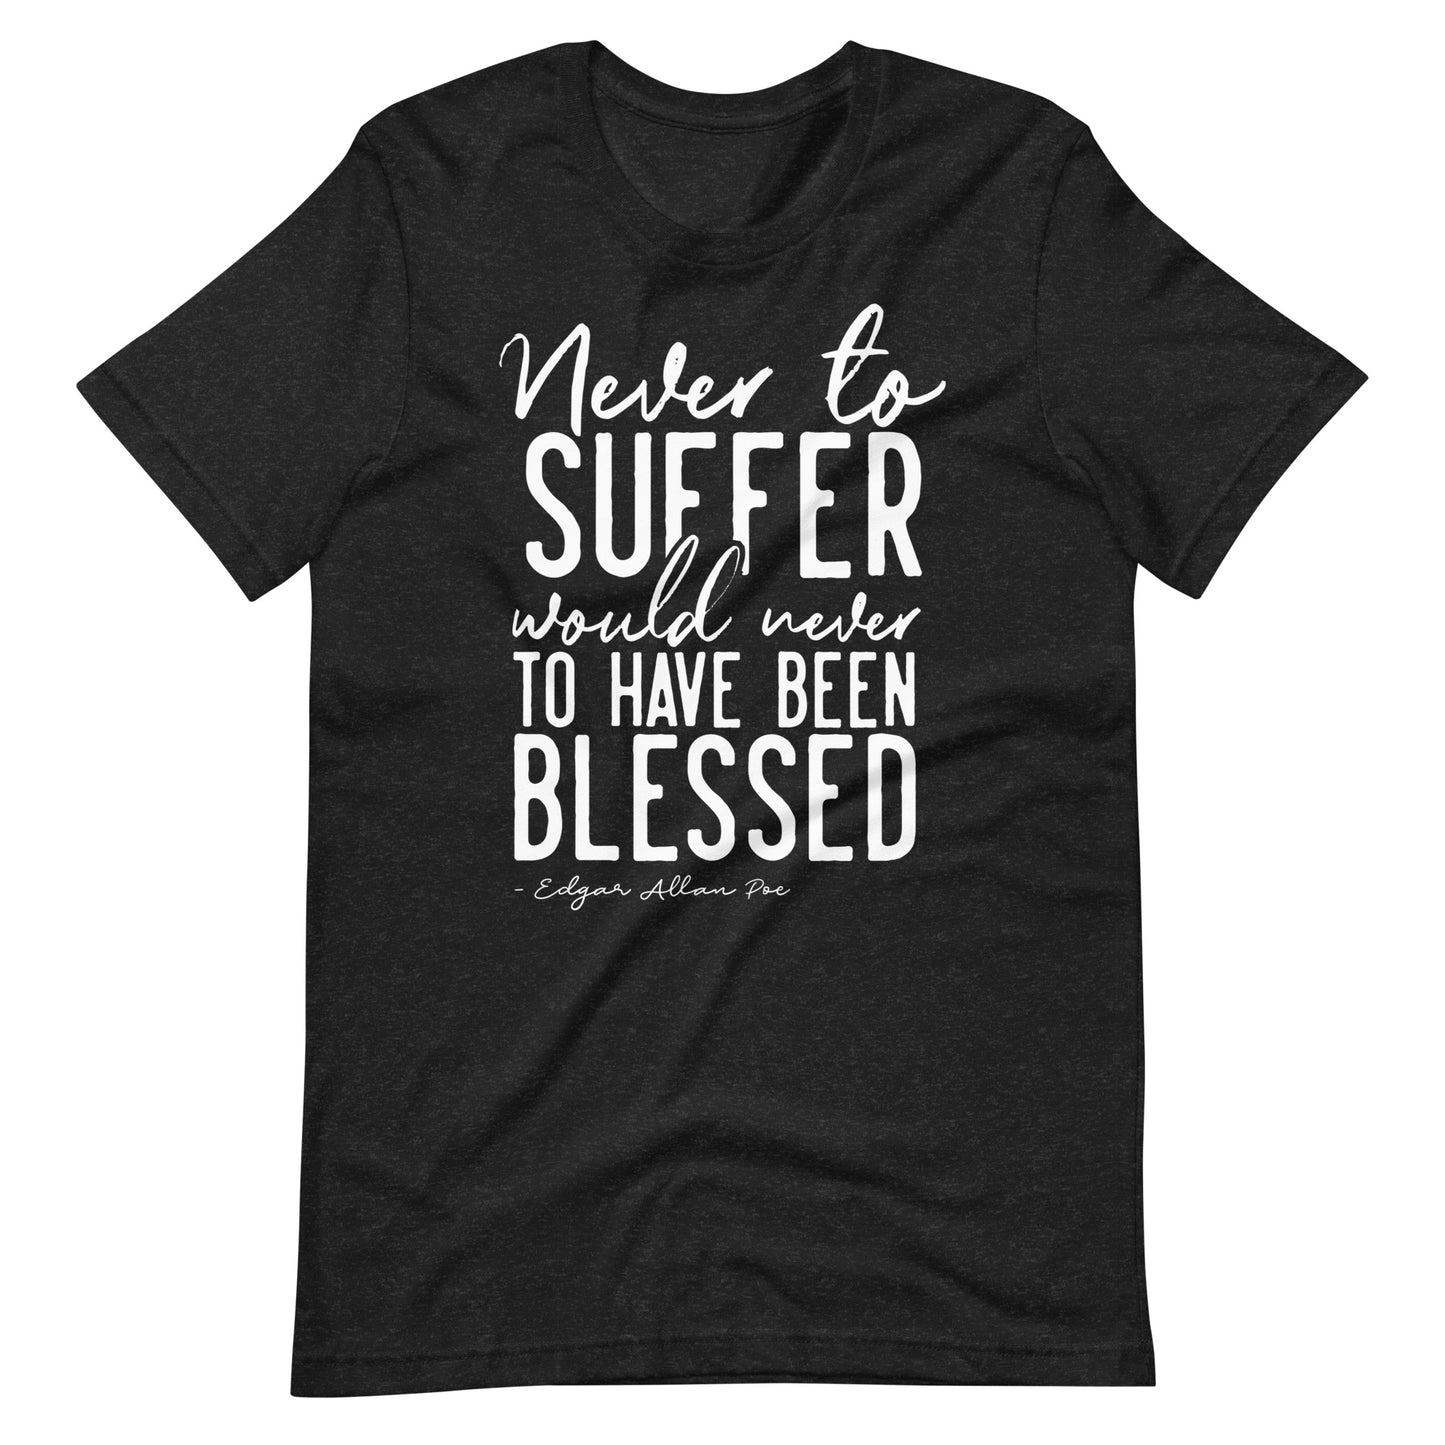 Never to Suffer Edgar Allan Poe Quote - Men's t-shirt - Black Heather Front